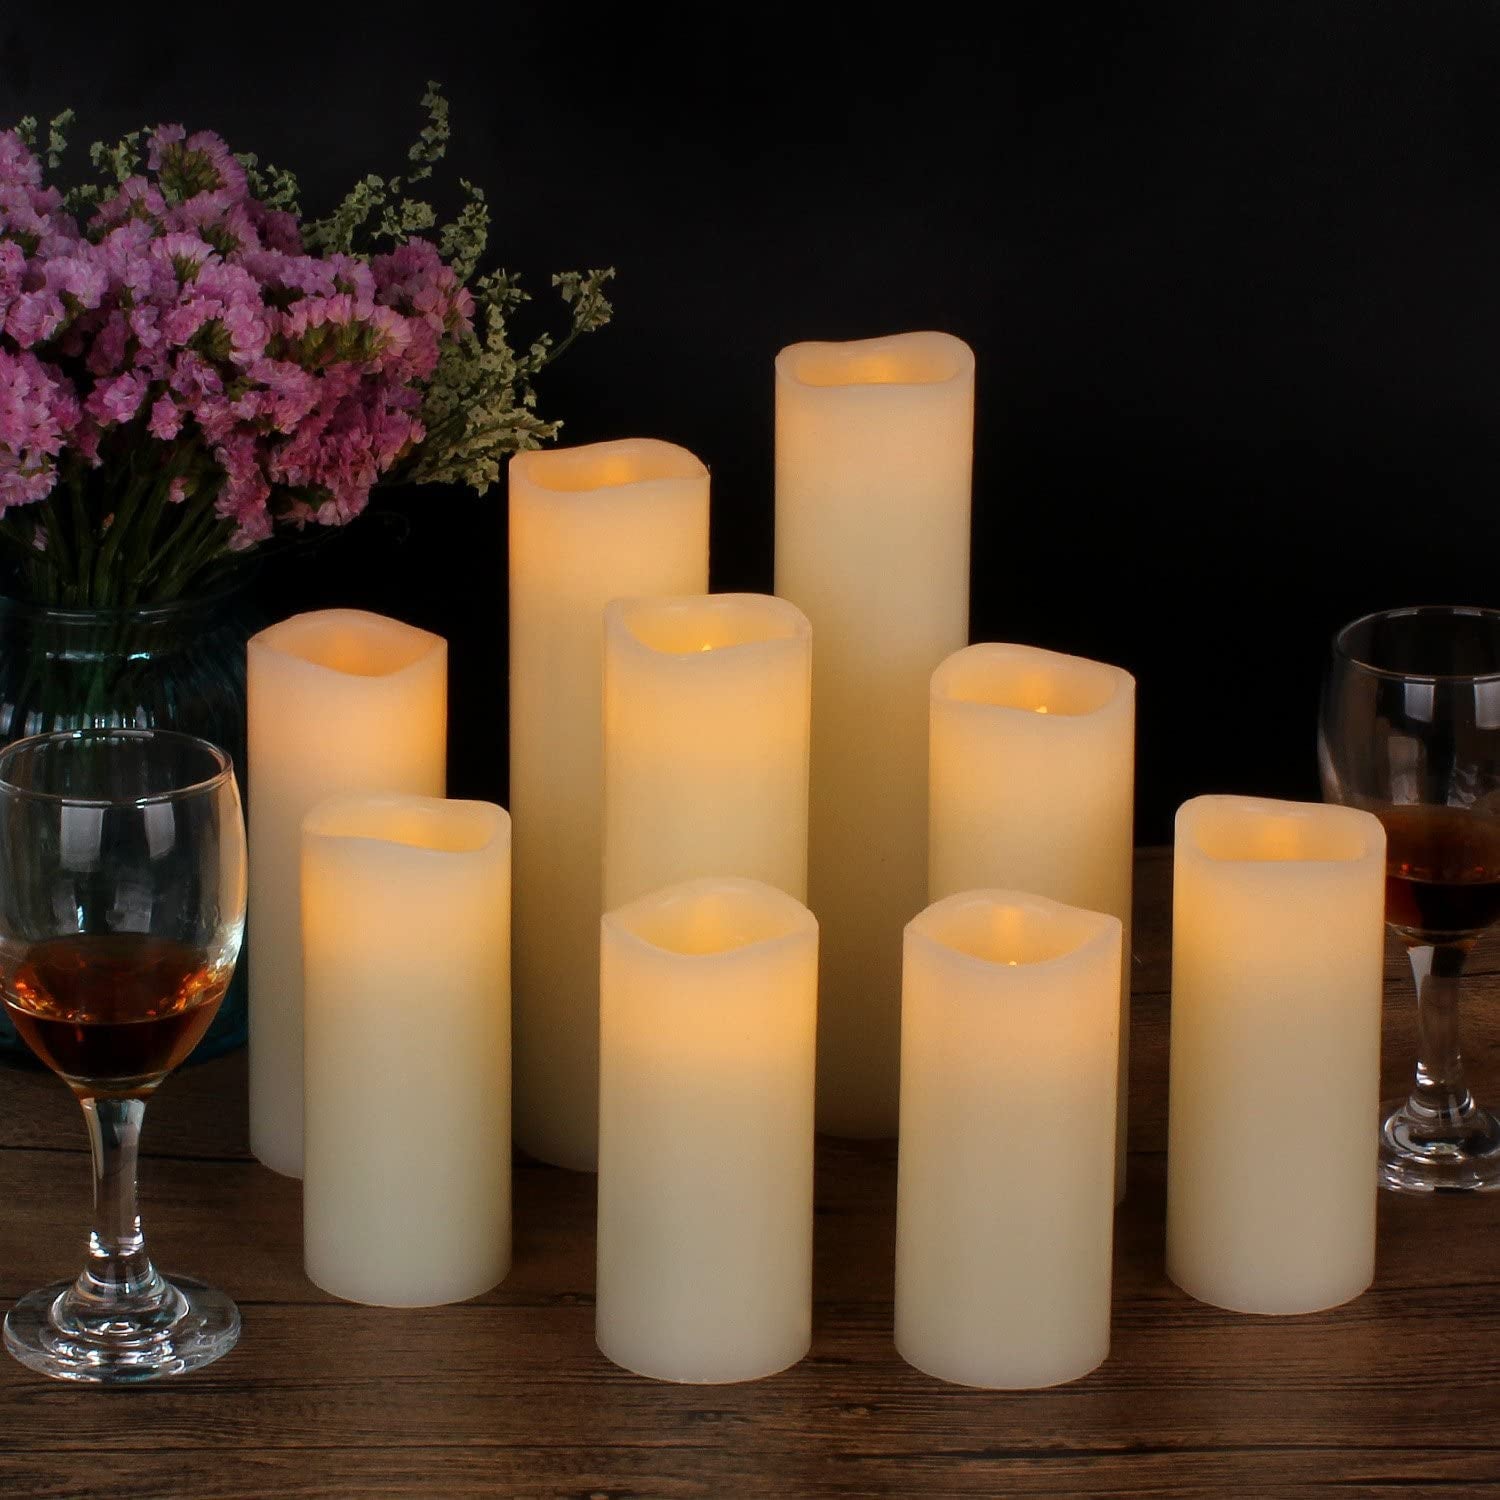 Wasin, Flameless Candles Led Candles Set of 9(H 4" 5" 6" 7" 8" 9" Xd 2.2") Ivory Real Wax Battery Candles with Remote Timer by (Batteries Not Included) (Ivory, Set of 9)